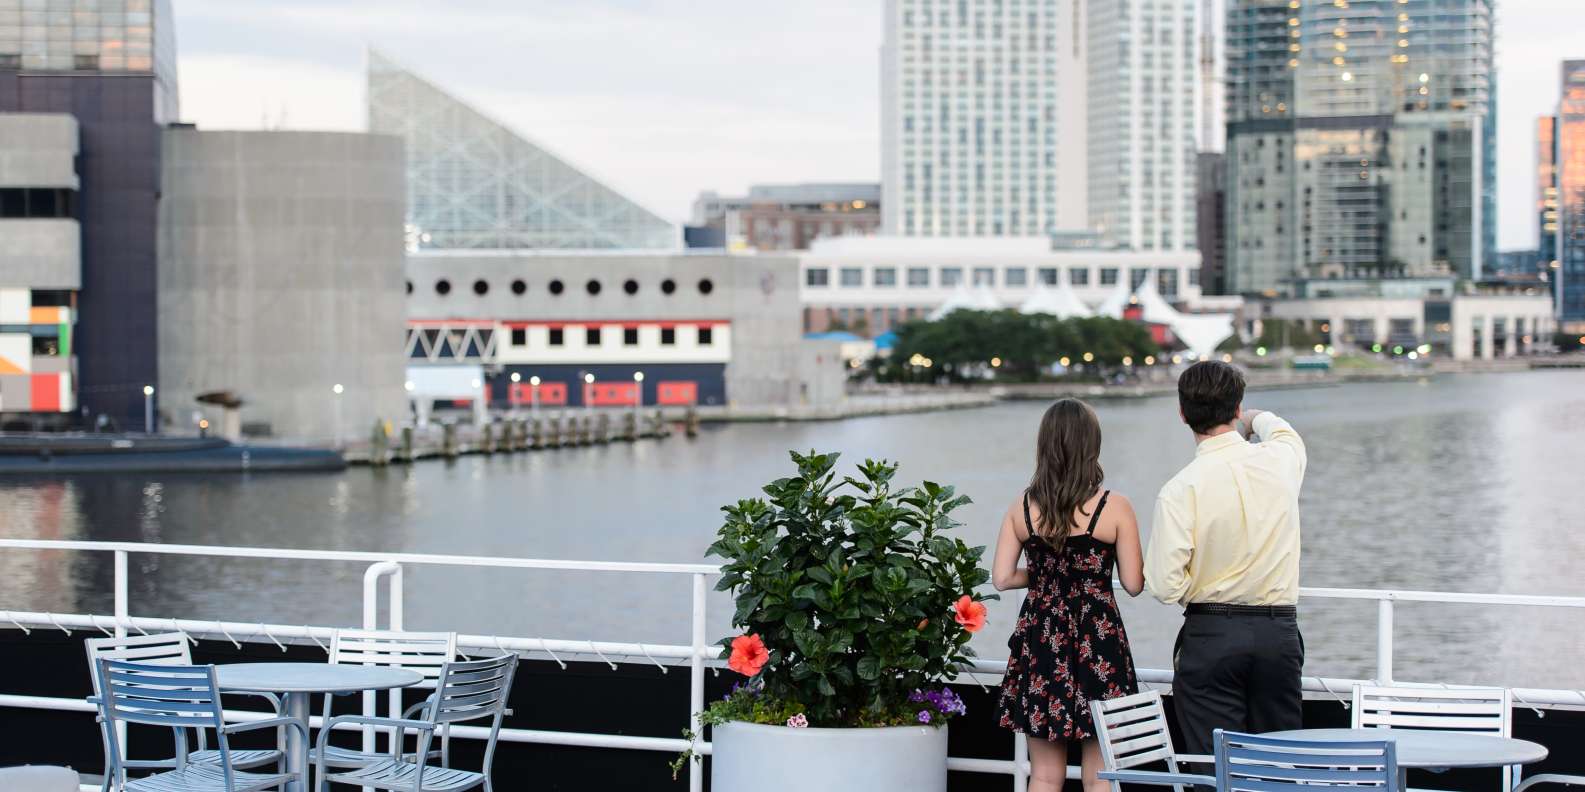 What to do in Baltimore, Maryland